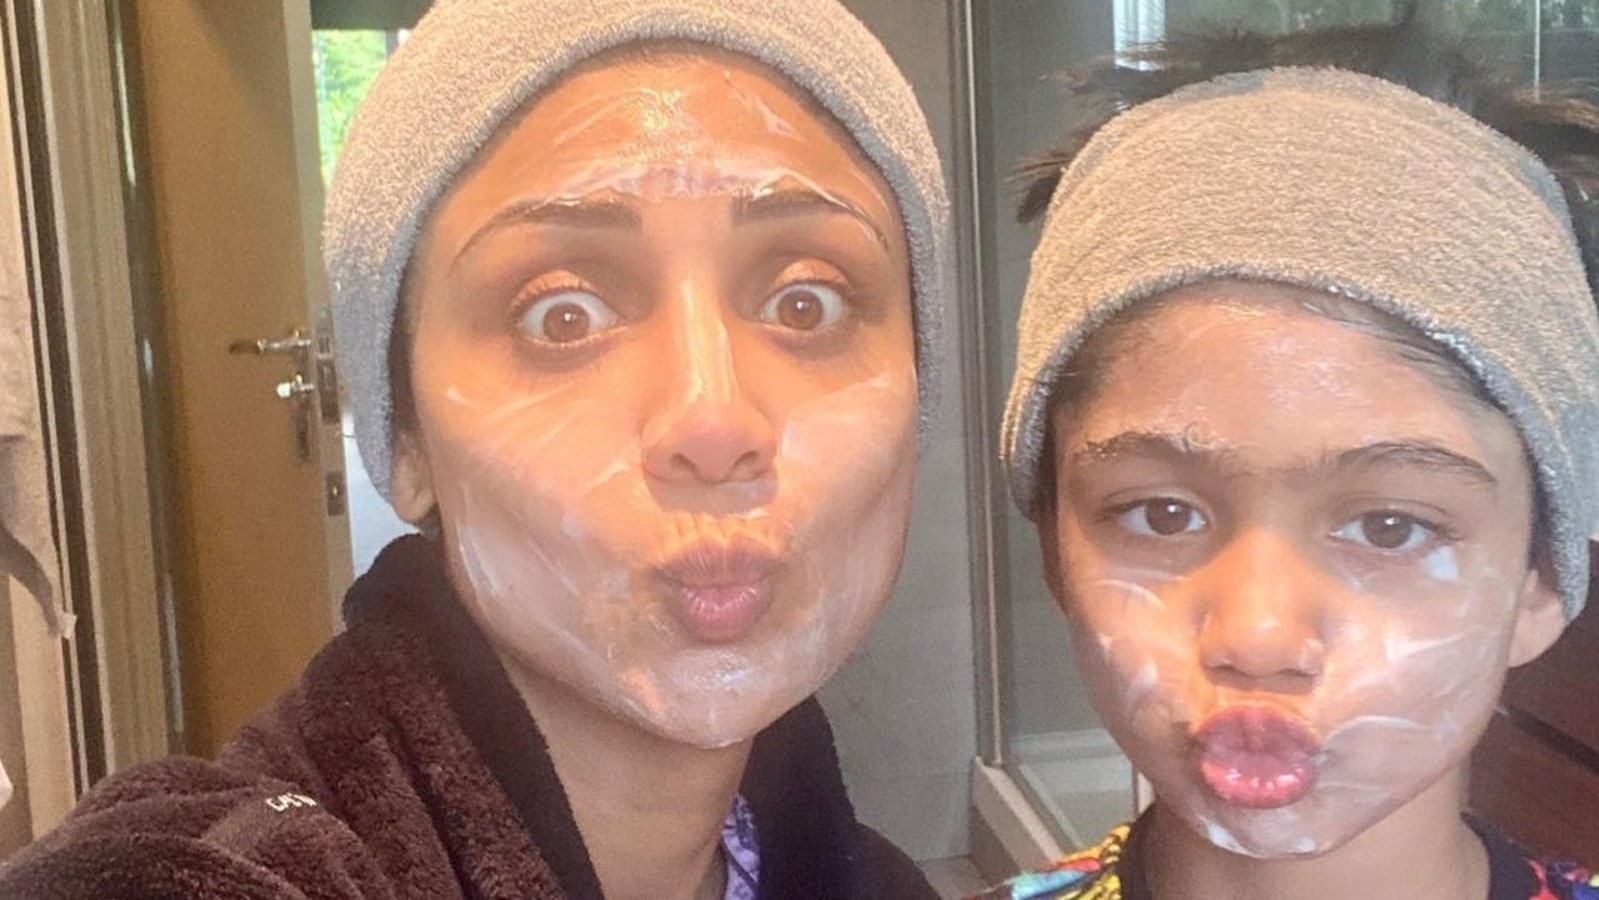 Shilpa Shetty Ki Nangi Chudai - Shilpa Shetty and her son Viaan pull off perfect pouts, see photo of them  'masking and basking in some Sunday vibes' | Bollywood - Hindustan Times